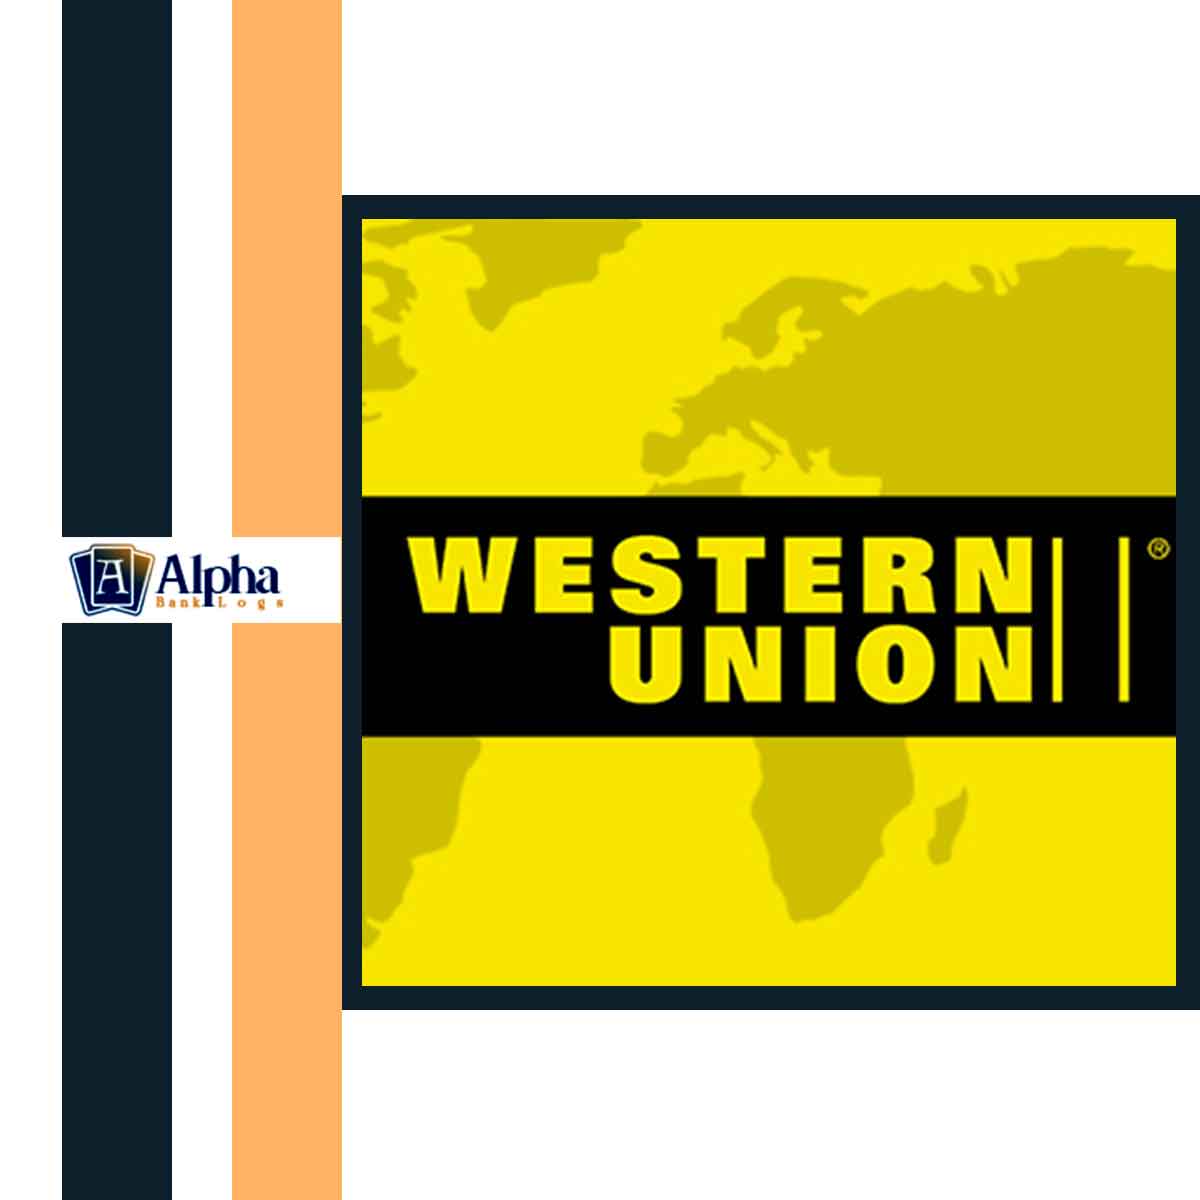 Western Union verified account + valid card attached